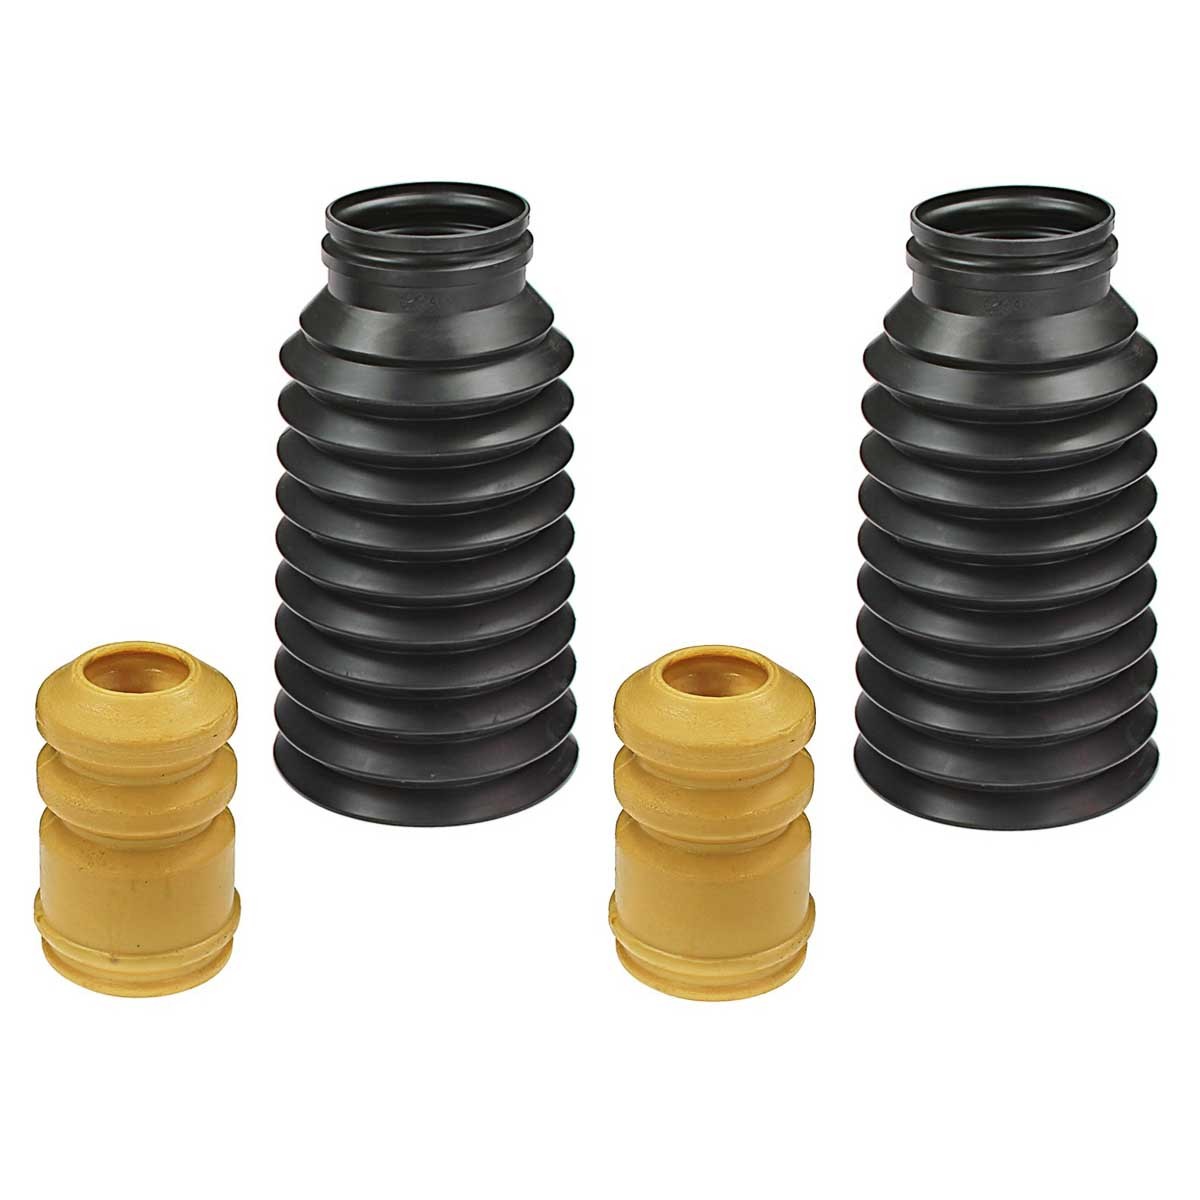 MEYLE 014 640 0003 Dust cover kit, shock absorber Front Axle, ORIGINAL Quality